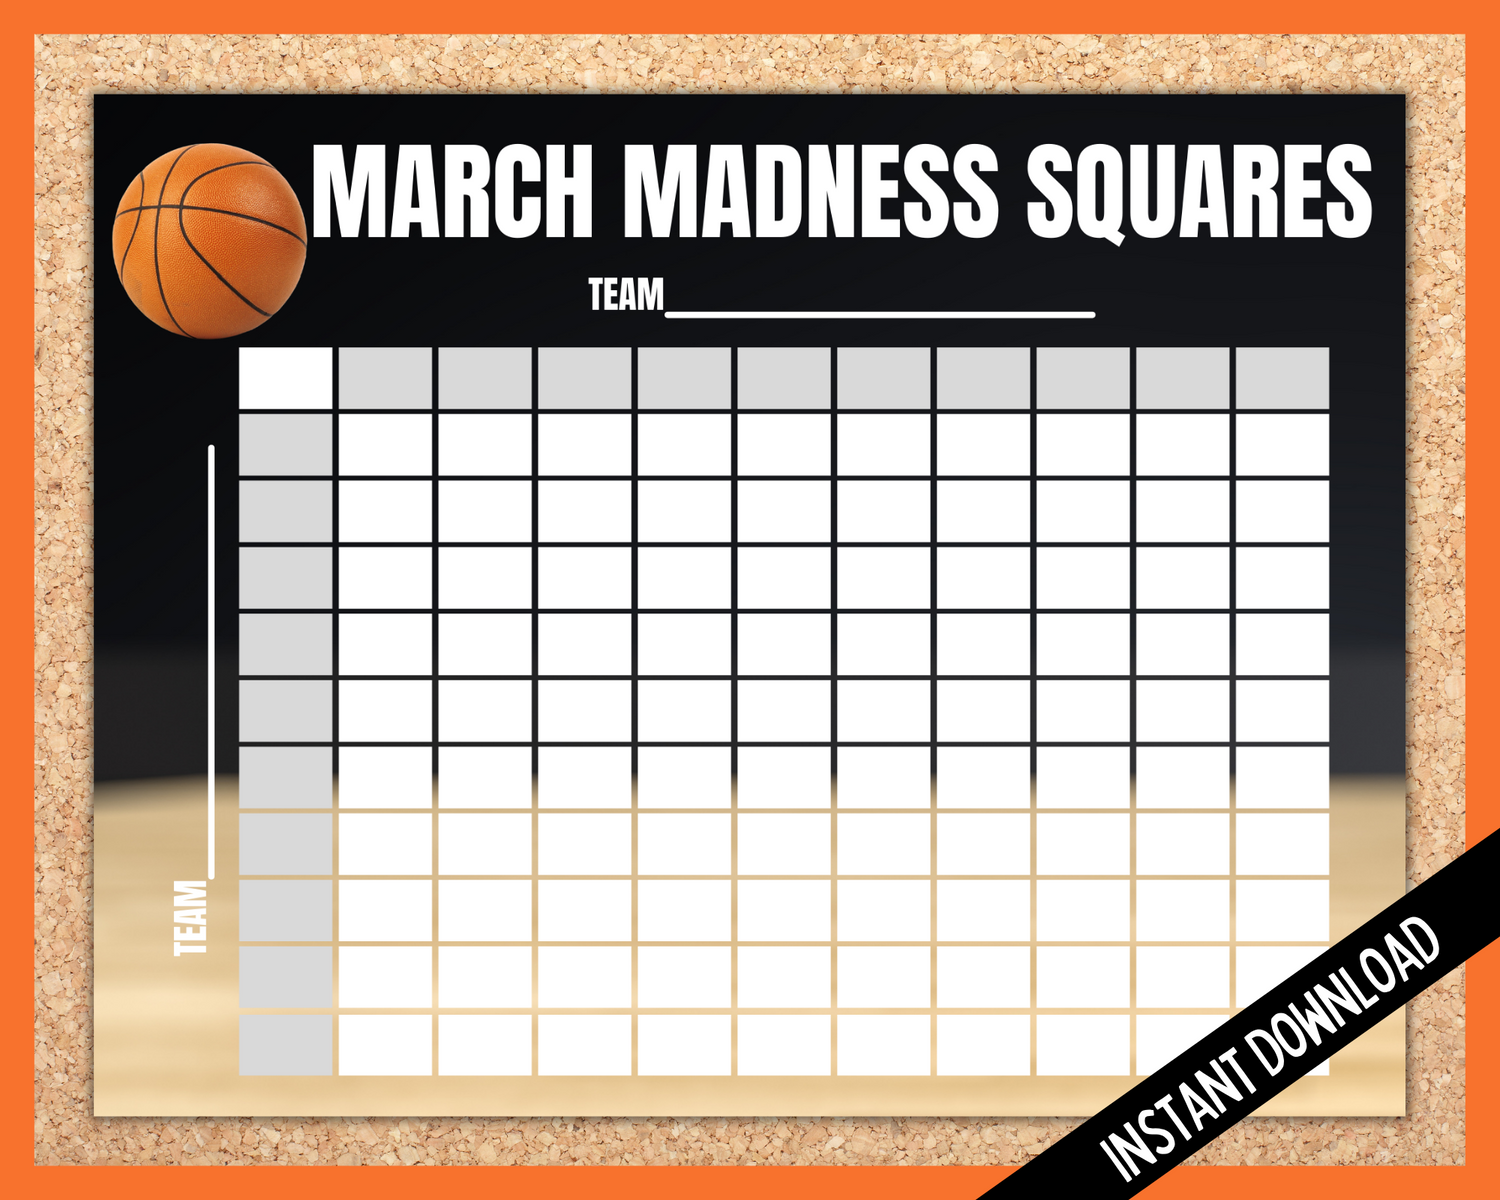 March Madness squares